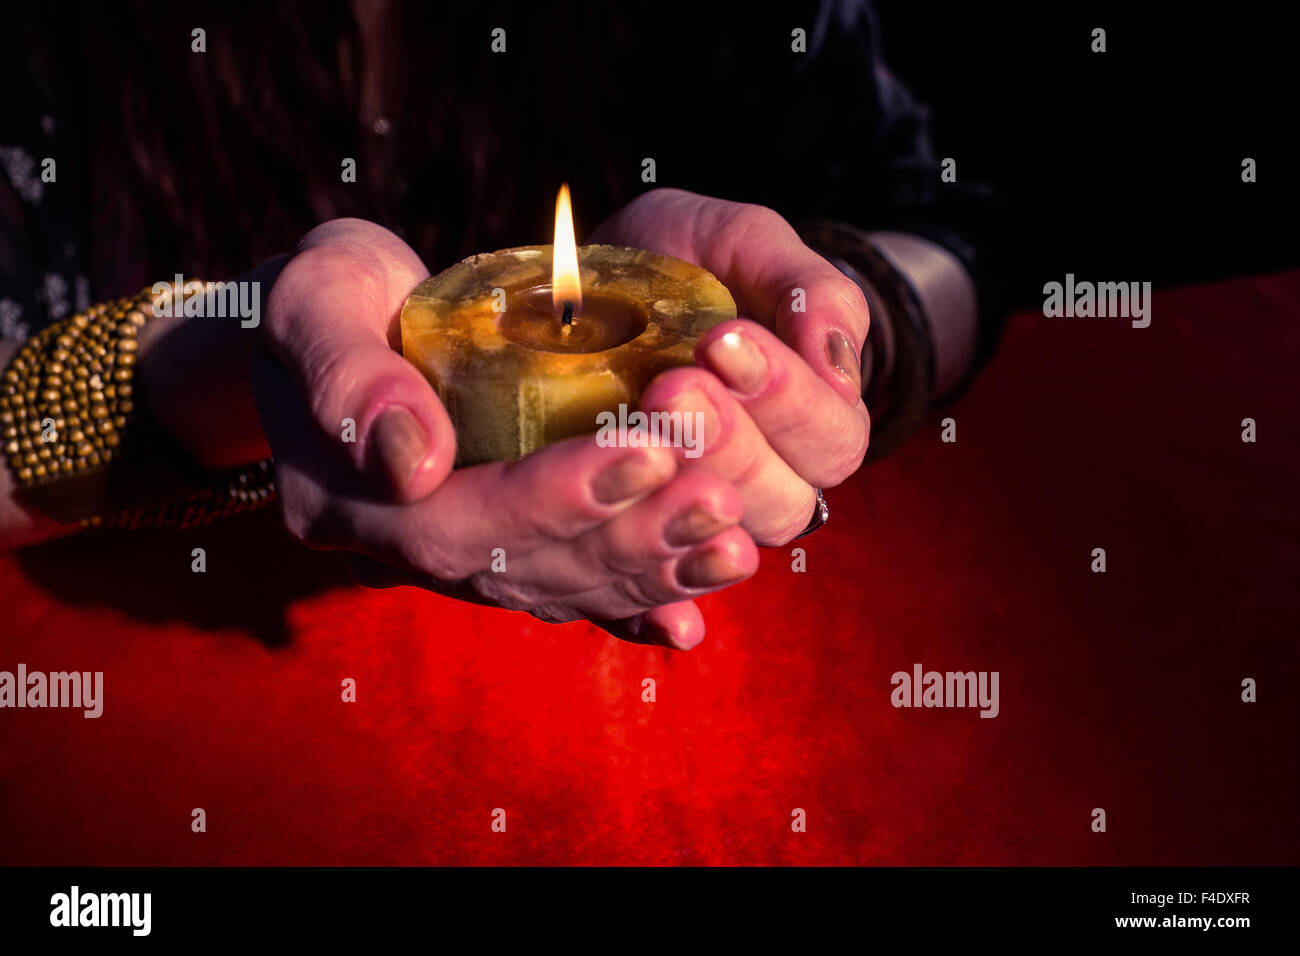 Fortune teller woman holding candle Stock Photo